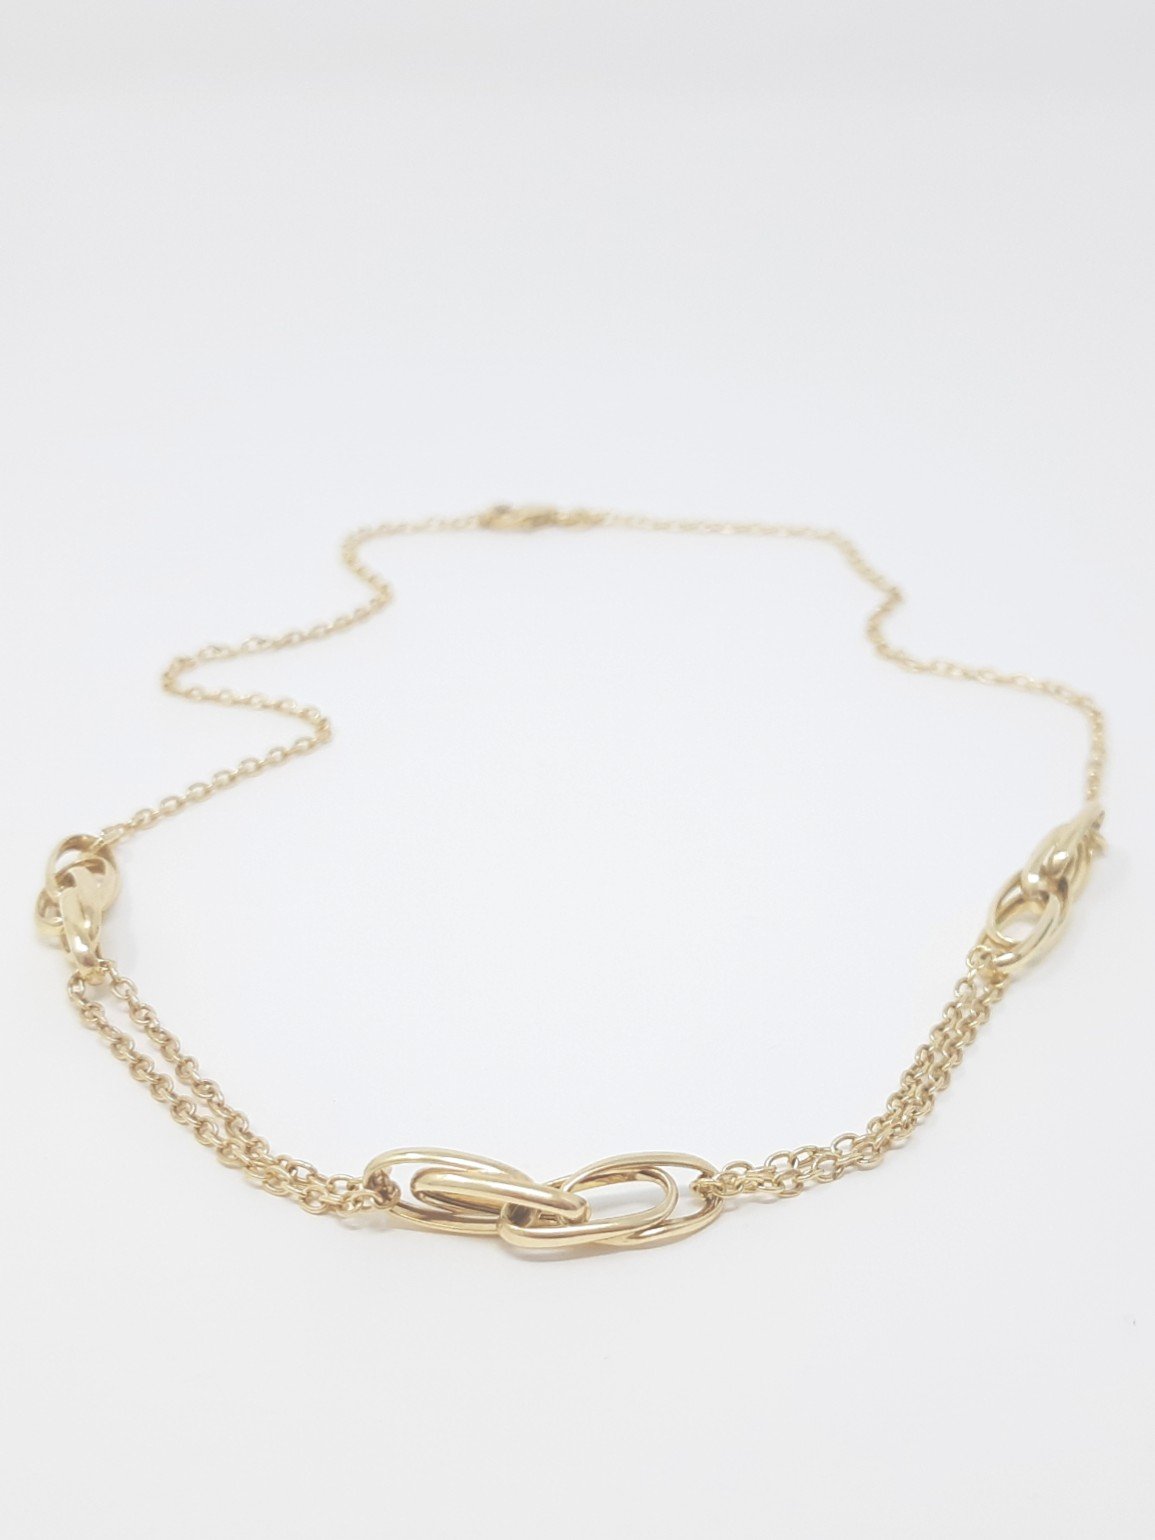 10K Yellow Gold Fancy Link Chain with Lobster Clasp - 18 Inches